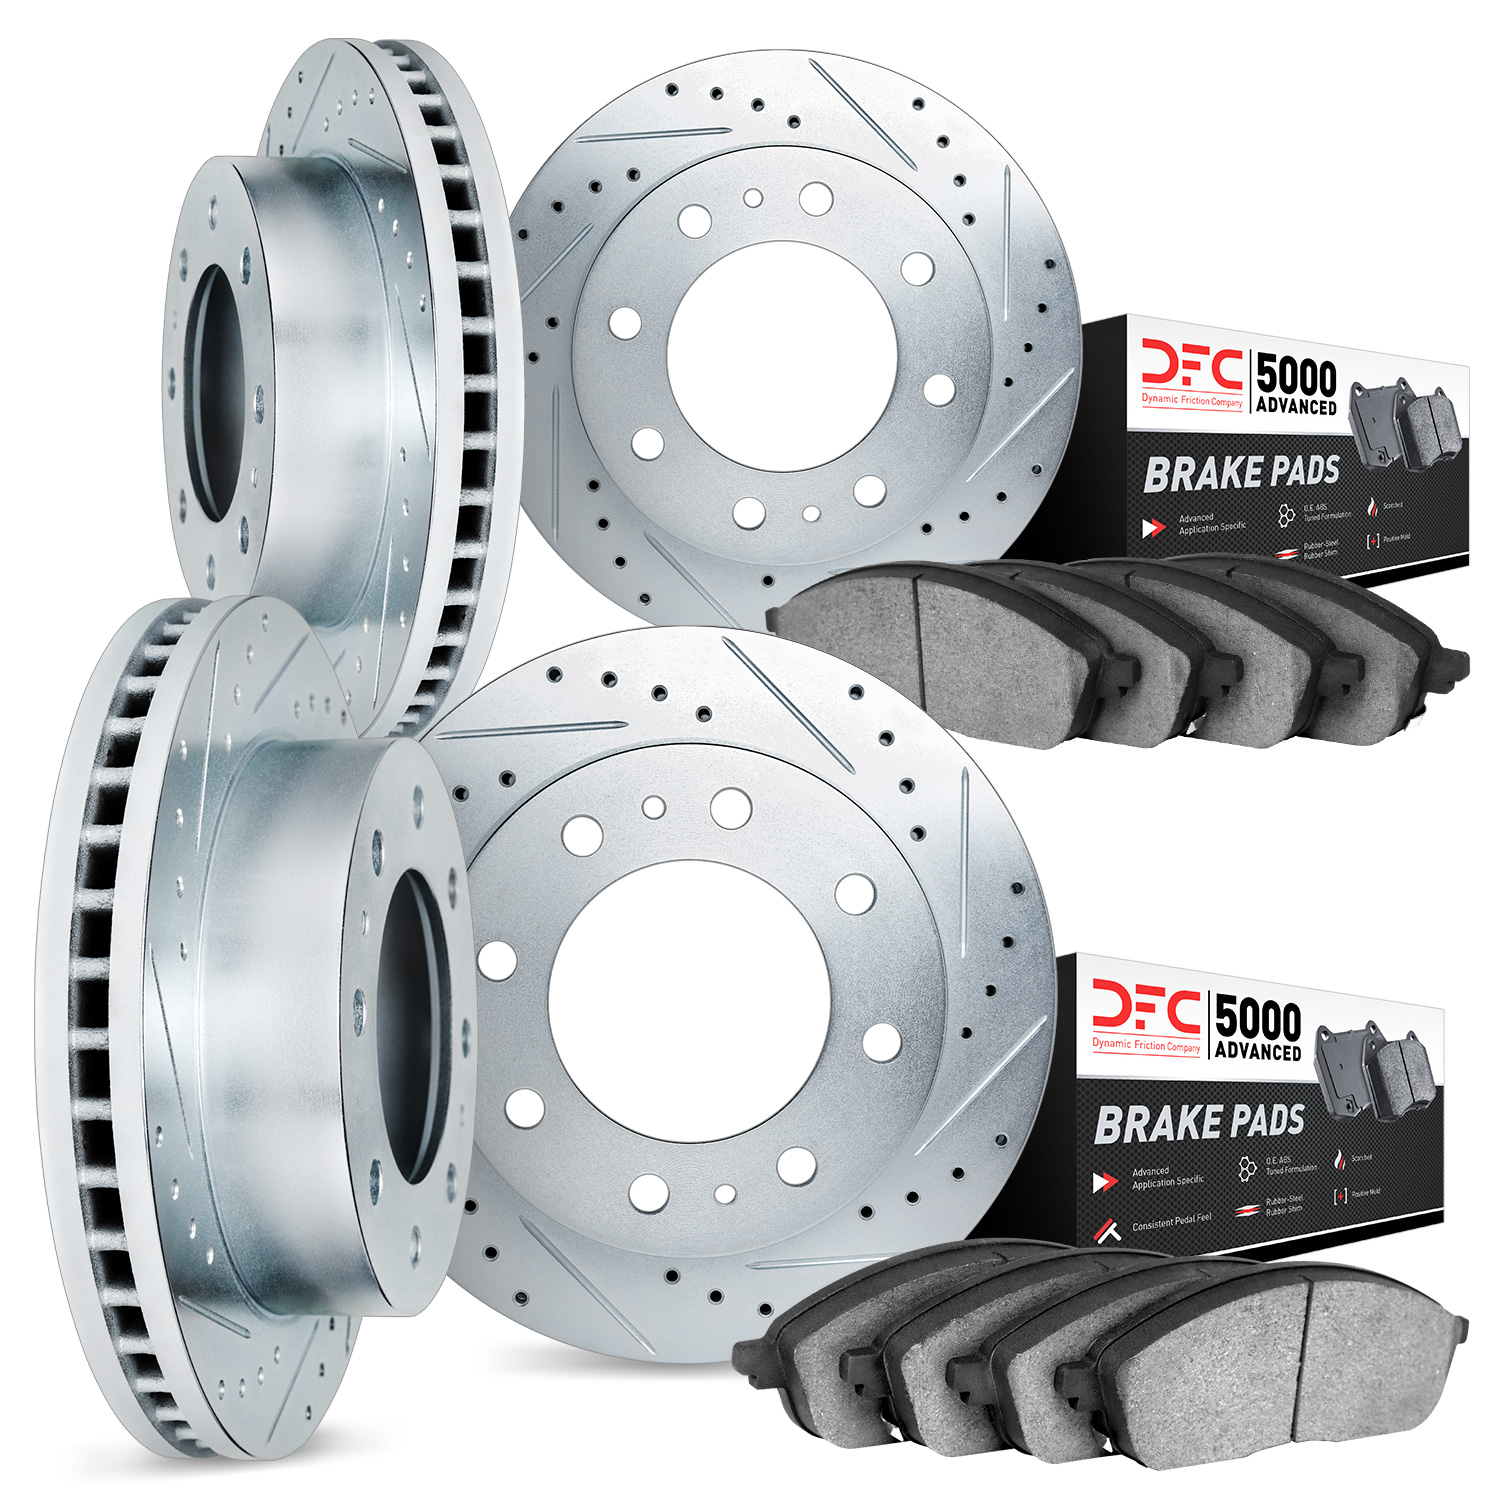 7504-46011 Drilled/Slotted Brake Rotors w/5000 Advanced Brake Pads Kit [Silver], 2006-2011 GM, Position: Front and Rear